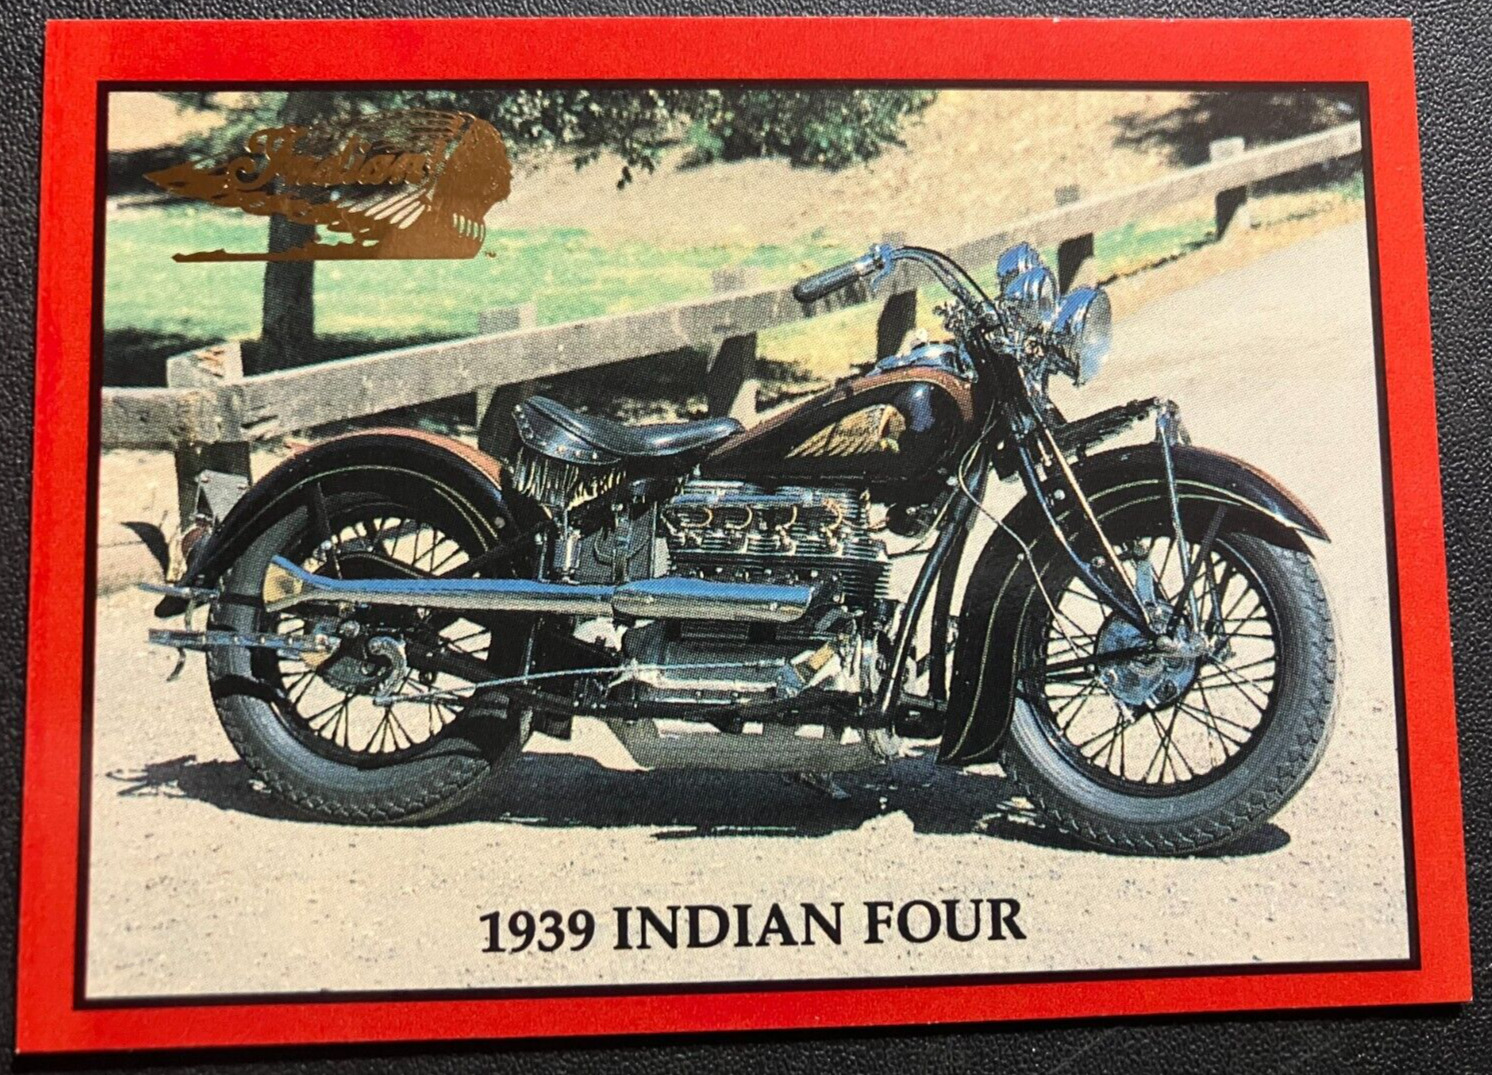 #6 1939 Indian Four Bike - Vintage Indian Motorcycles Series 2 Trading Card